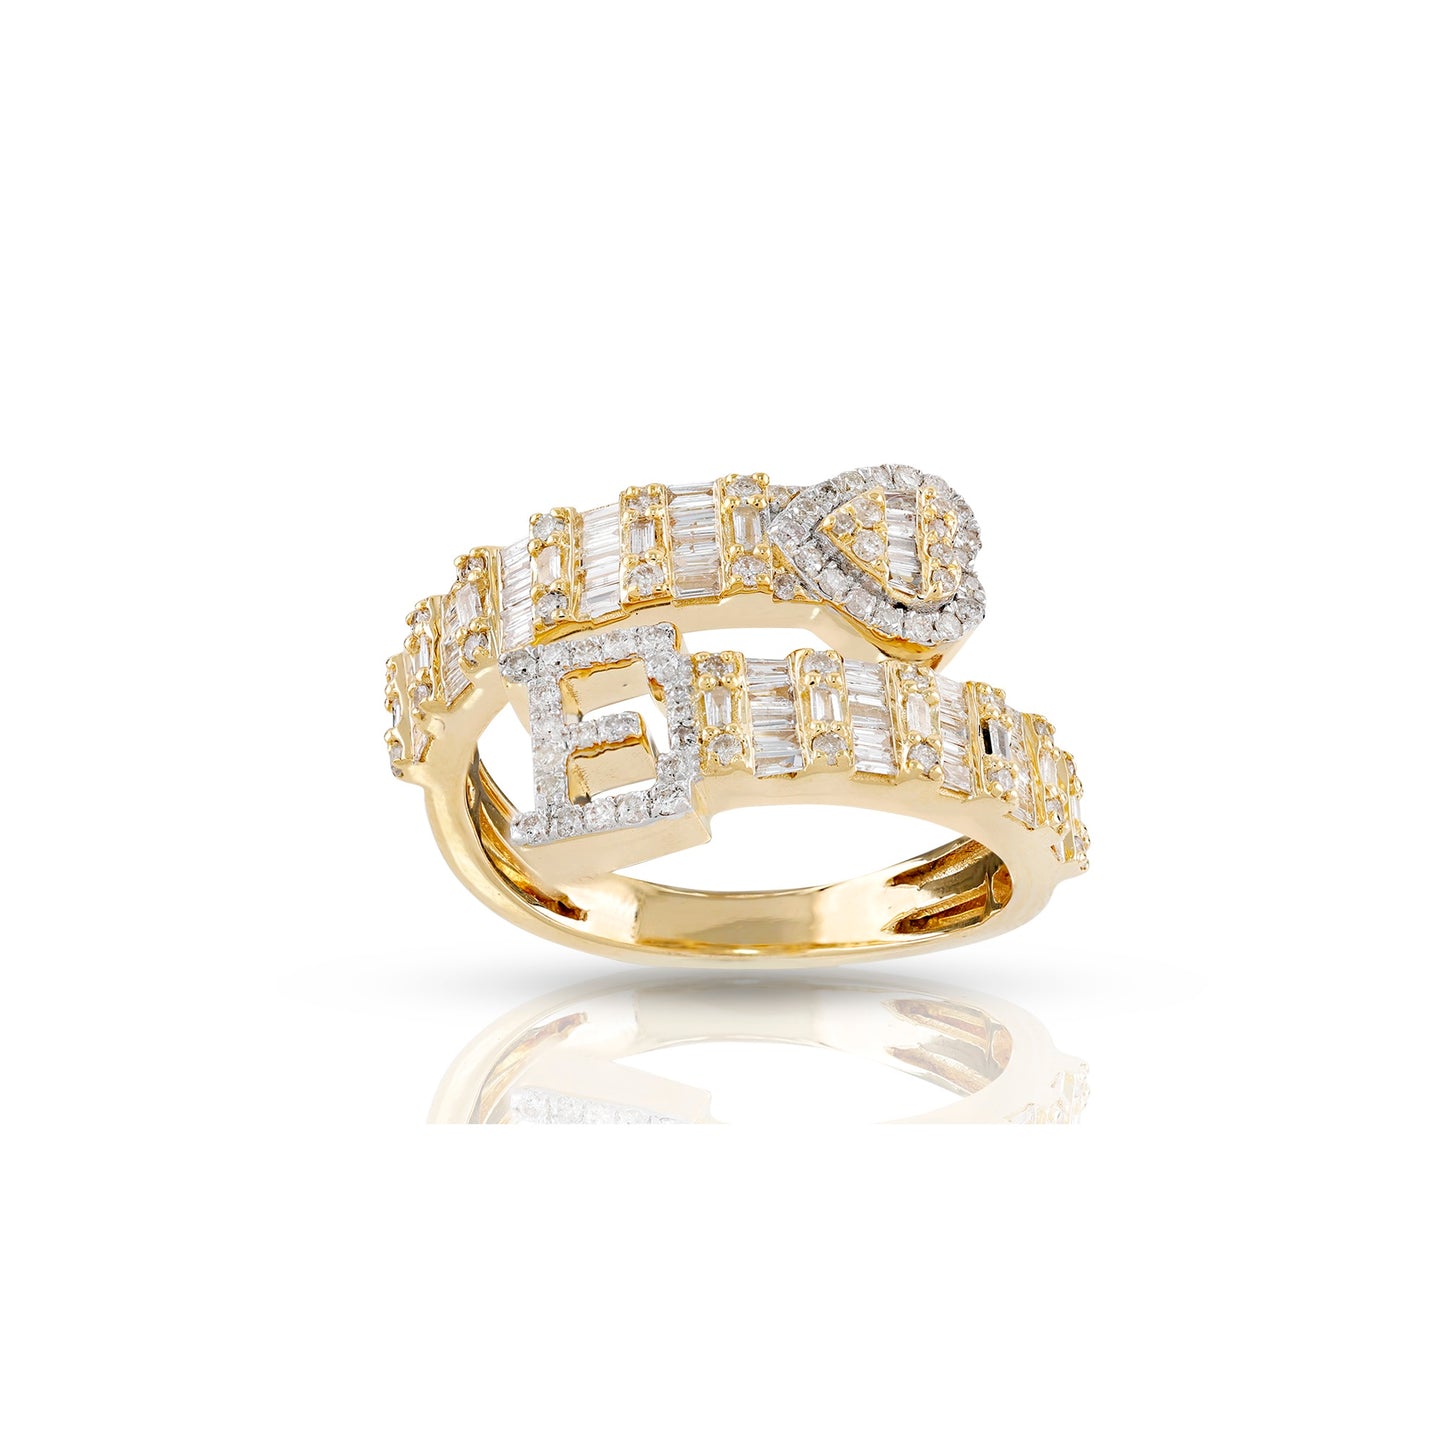 10KT Yellow Gold Baguette Diamond Heart Initial Rings by Truth Jewel